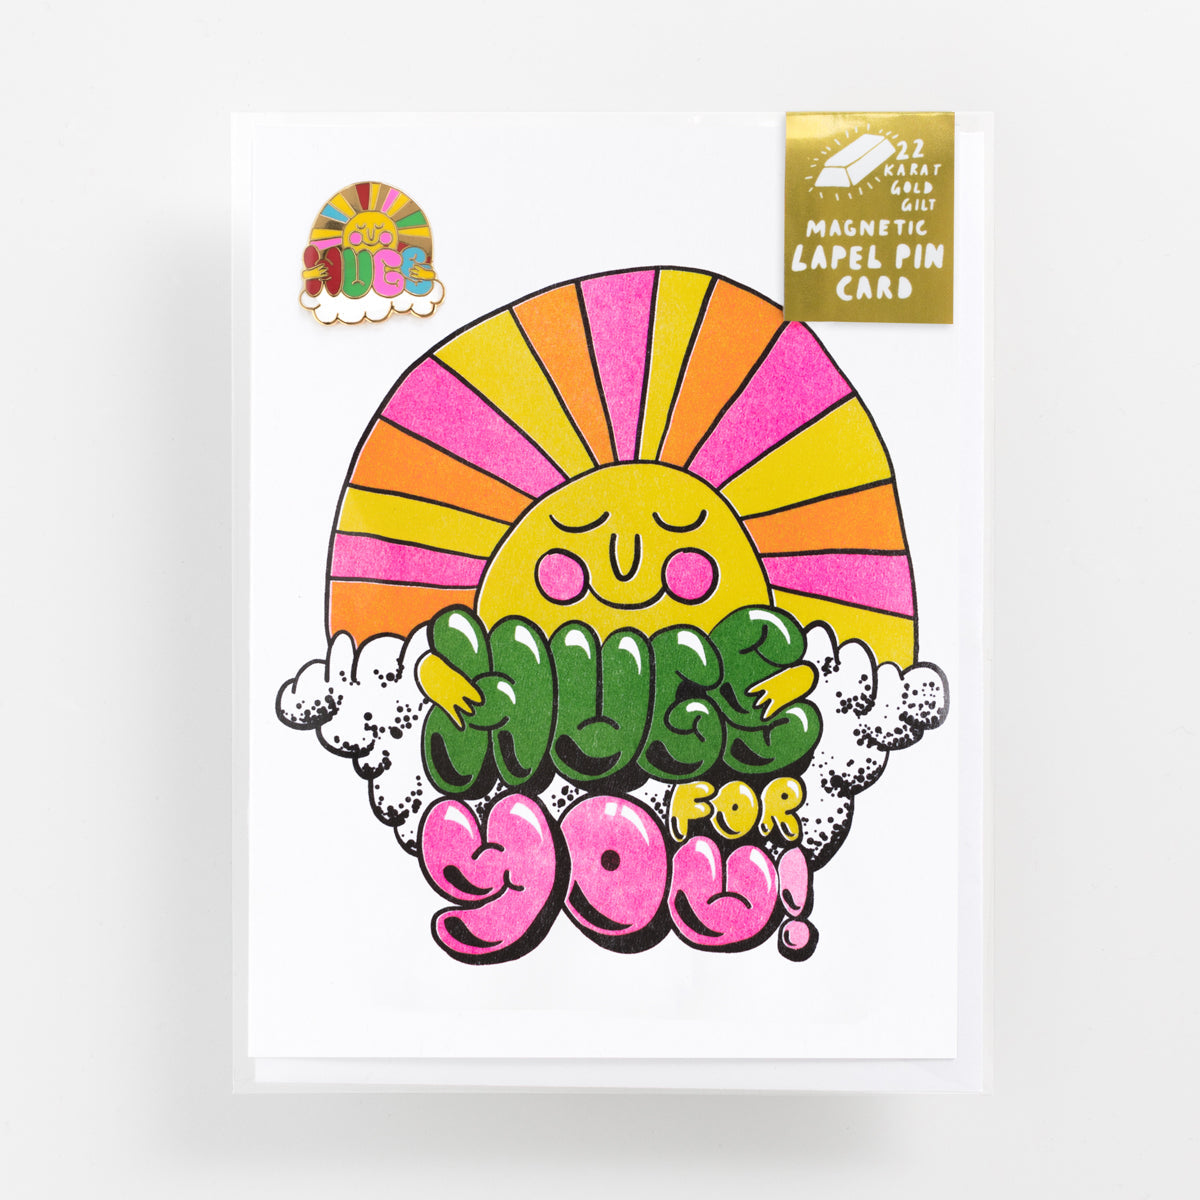 Hugs For You Risograph Card With Magnetic Lapel Pin